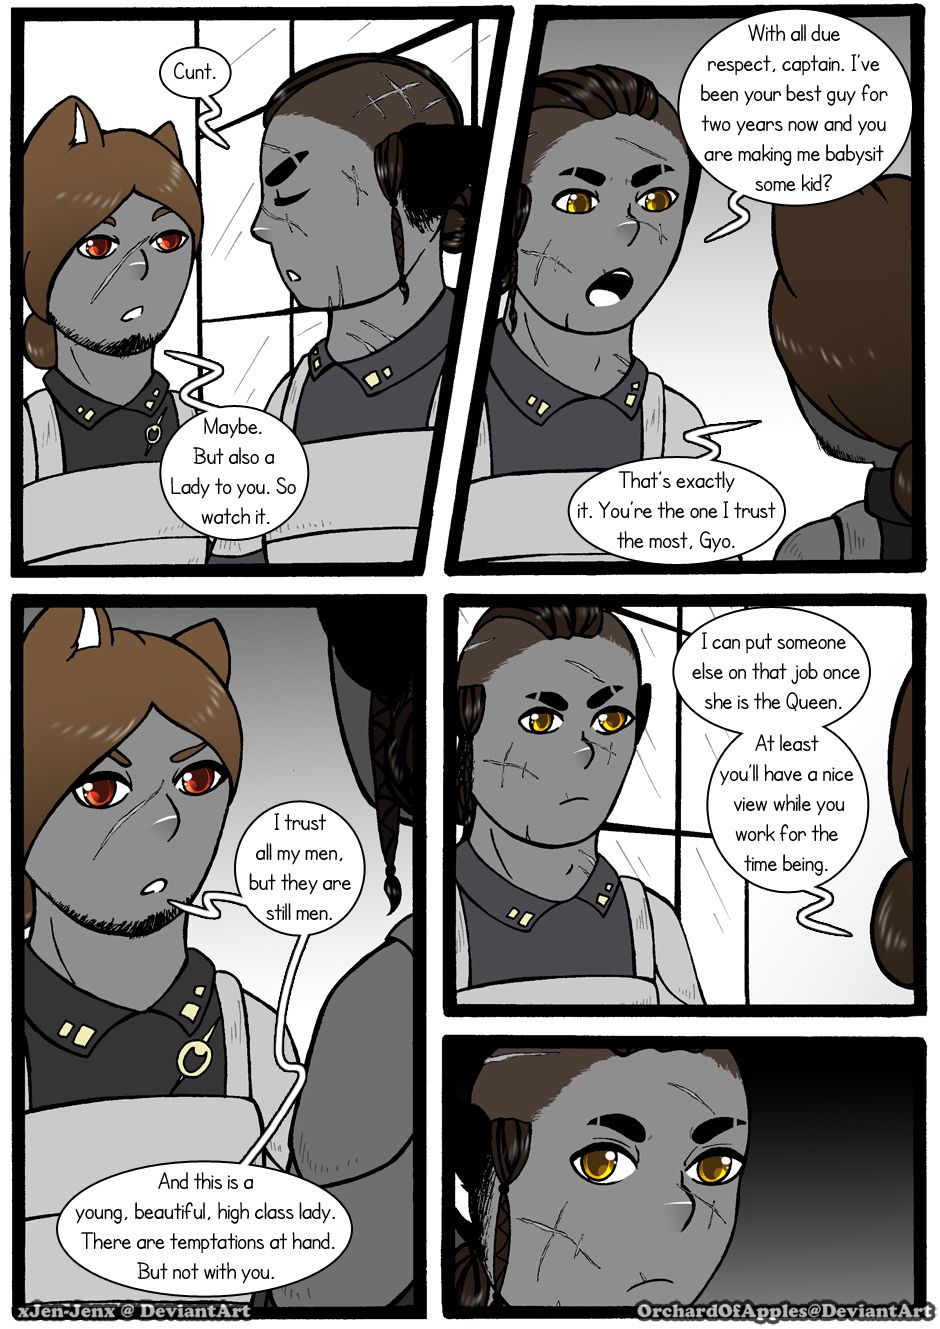 [Jeny-jen94] Between Kings and Queens [Ongoing] 387